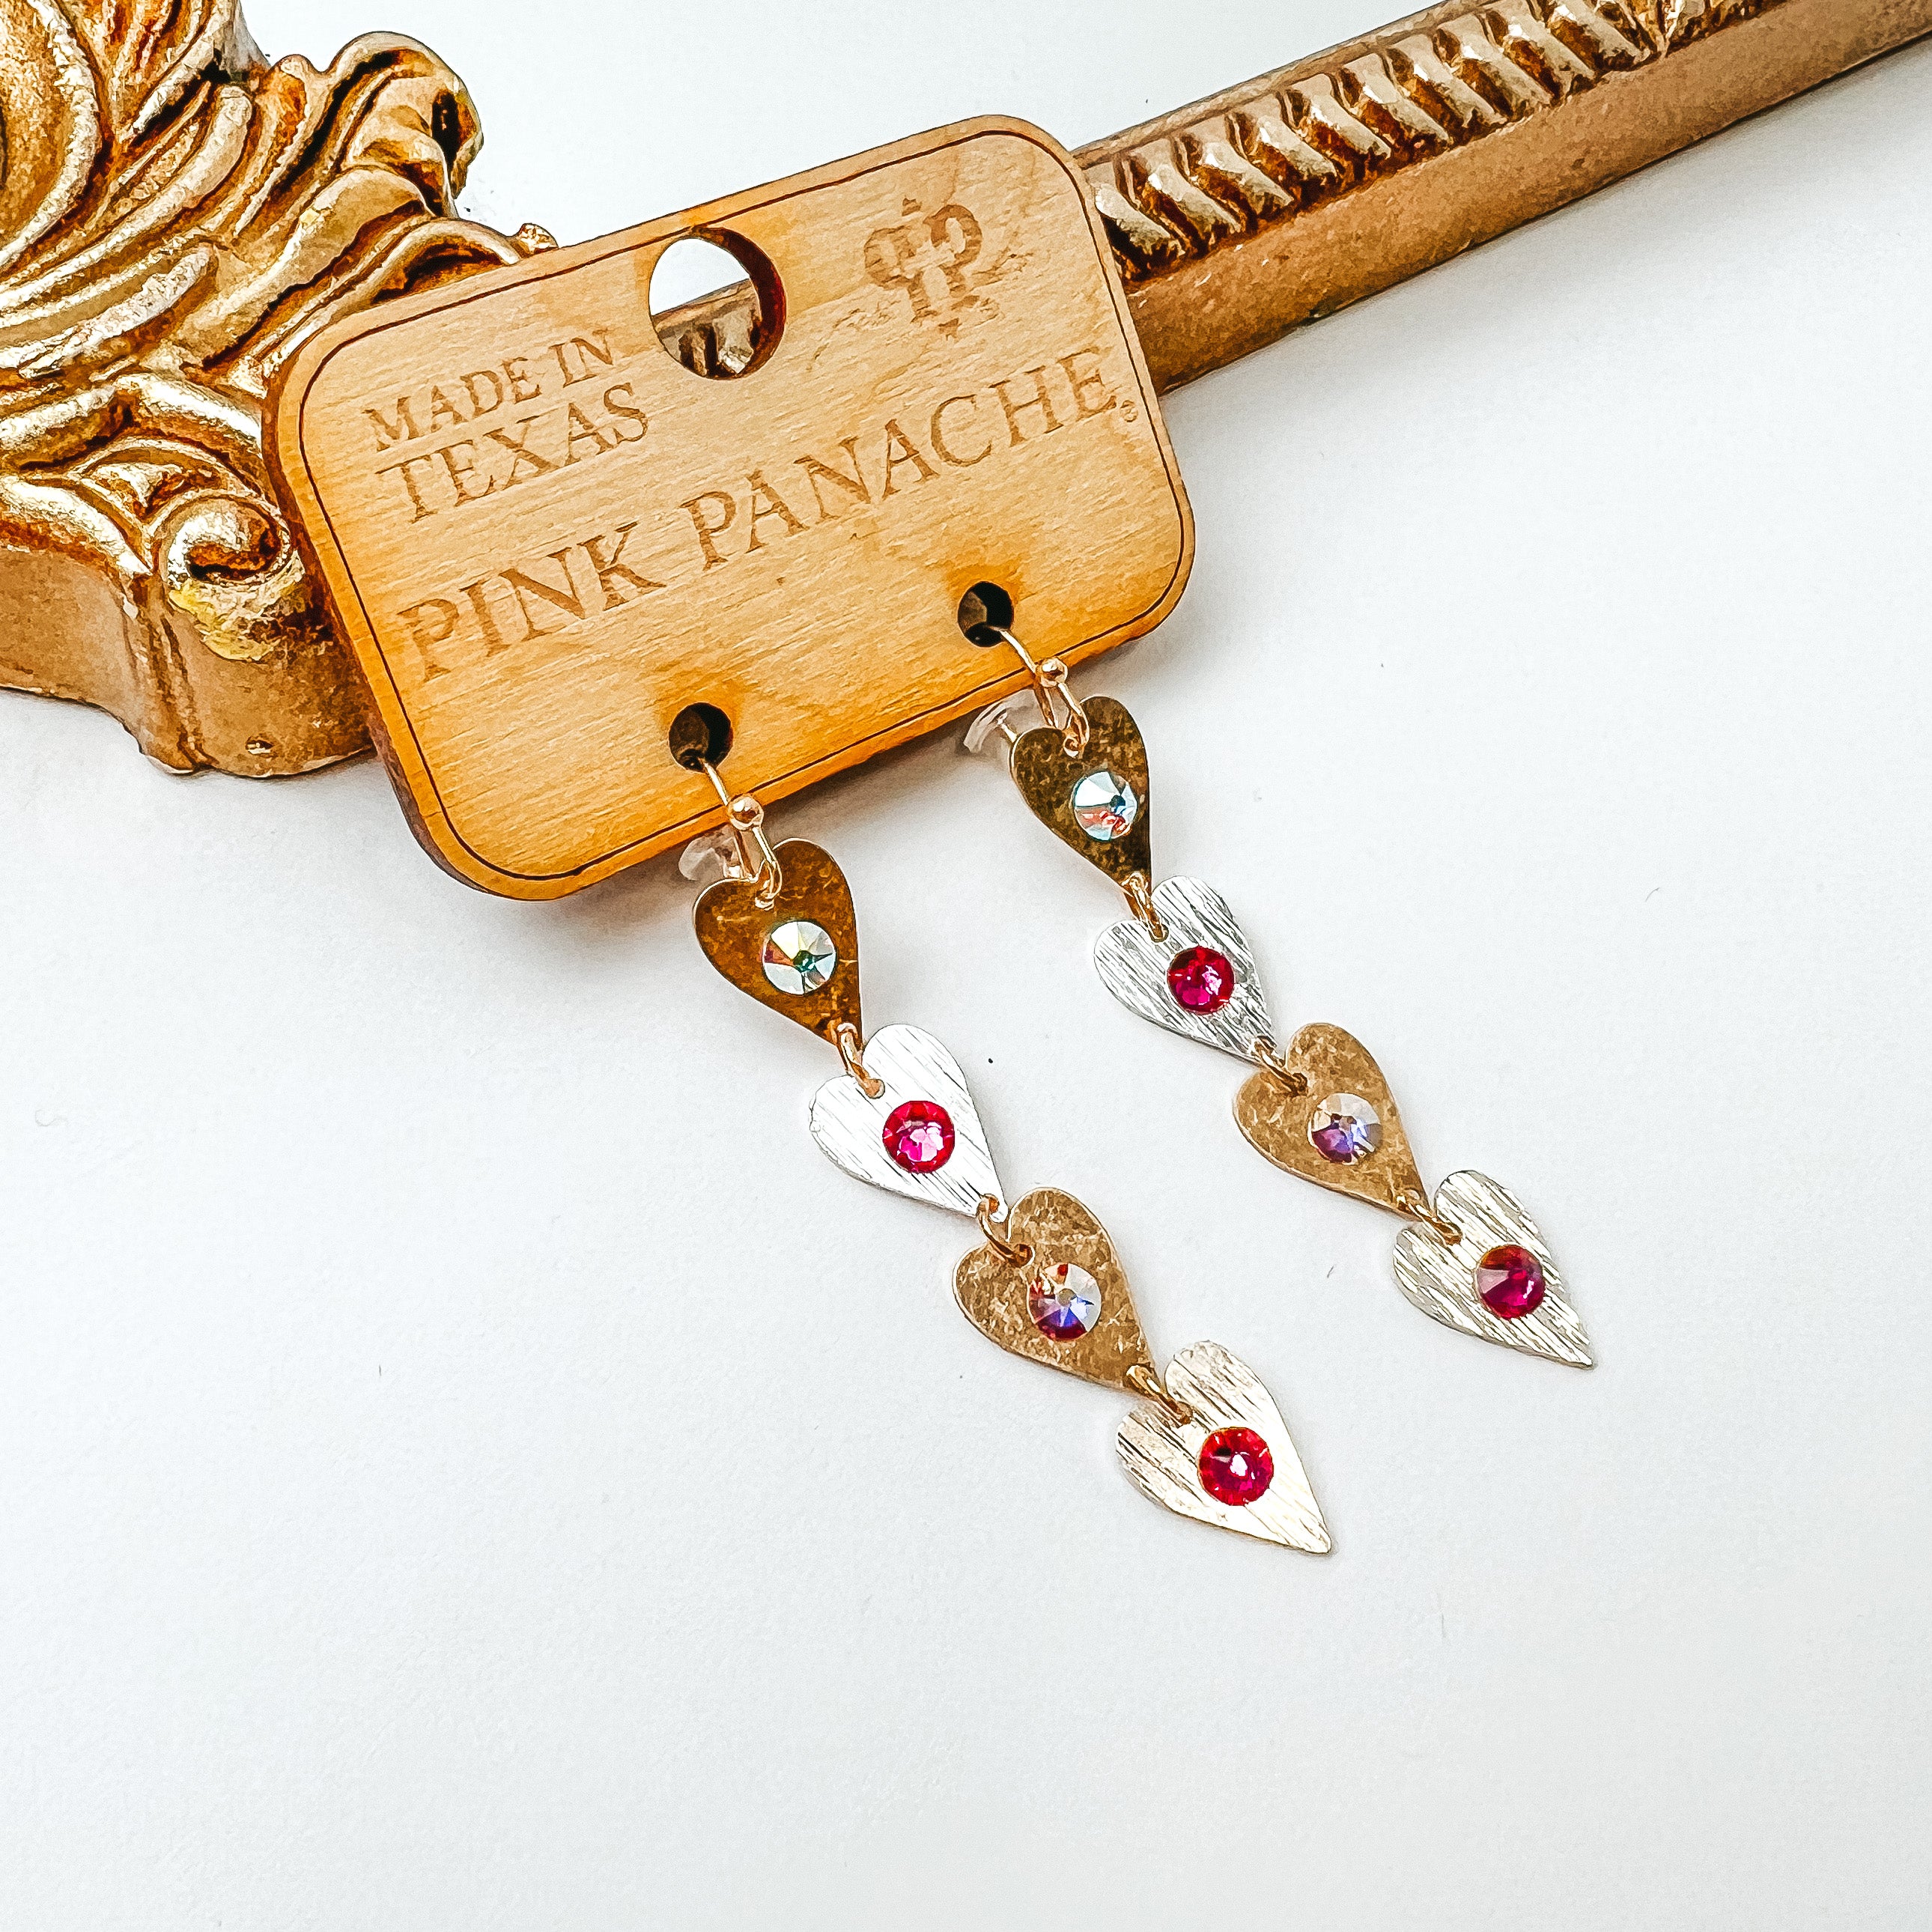 Pink Panache | Gold and Silver Tone Heart Earrings with AB and Fuchsia Pink Crystals - Giddy Up Glamour Boutique